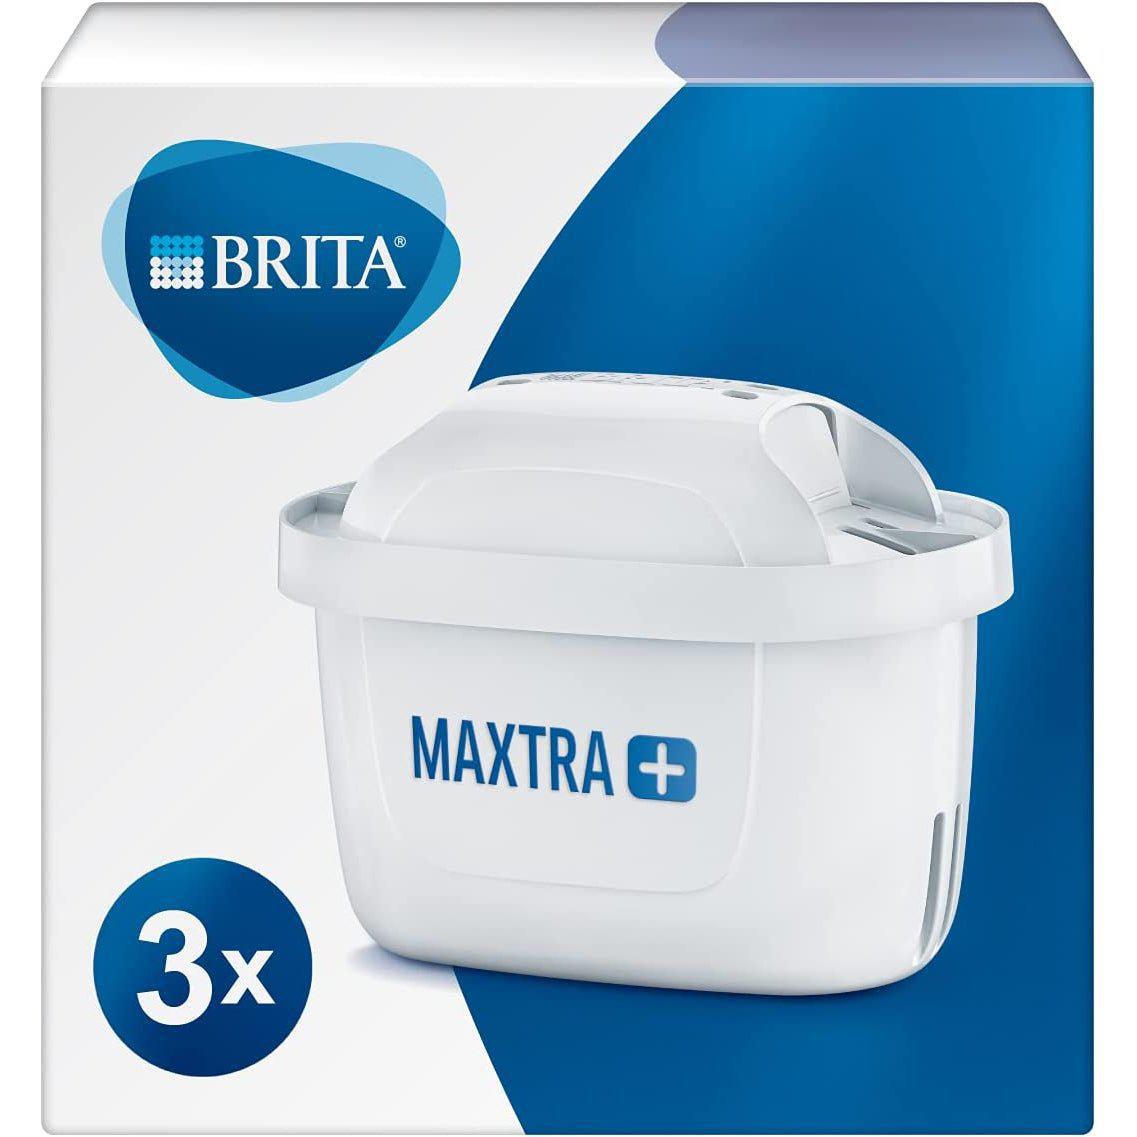 Brita Maxtra + Replacement Water Filter Cartridges White, 3pk - Healthxpress.ie